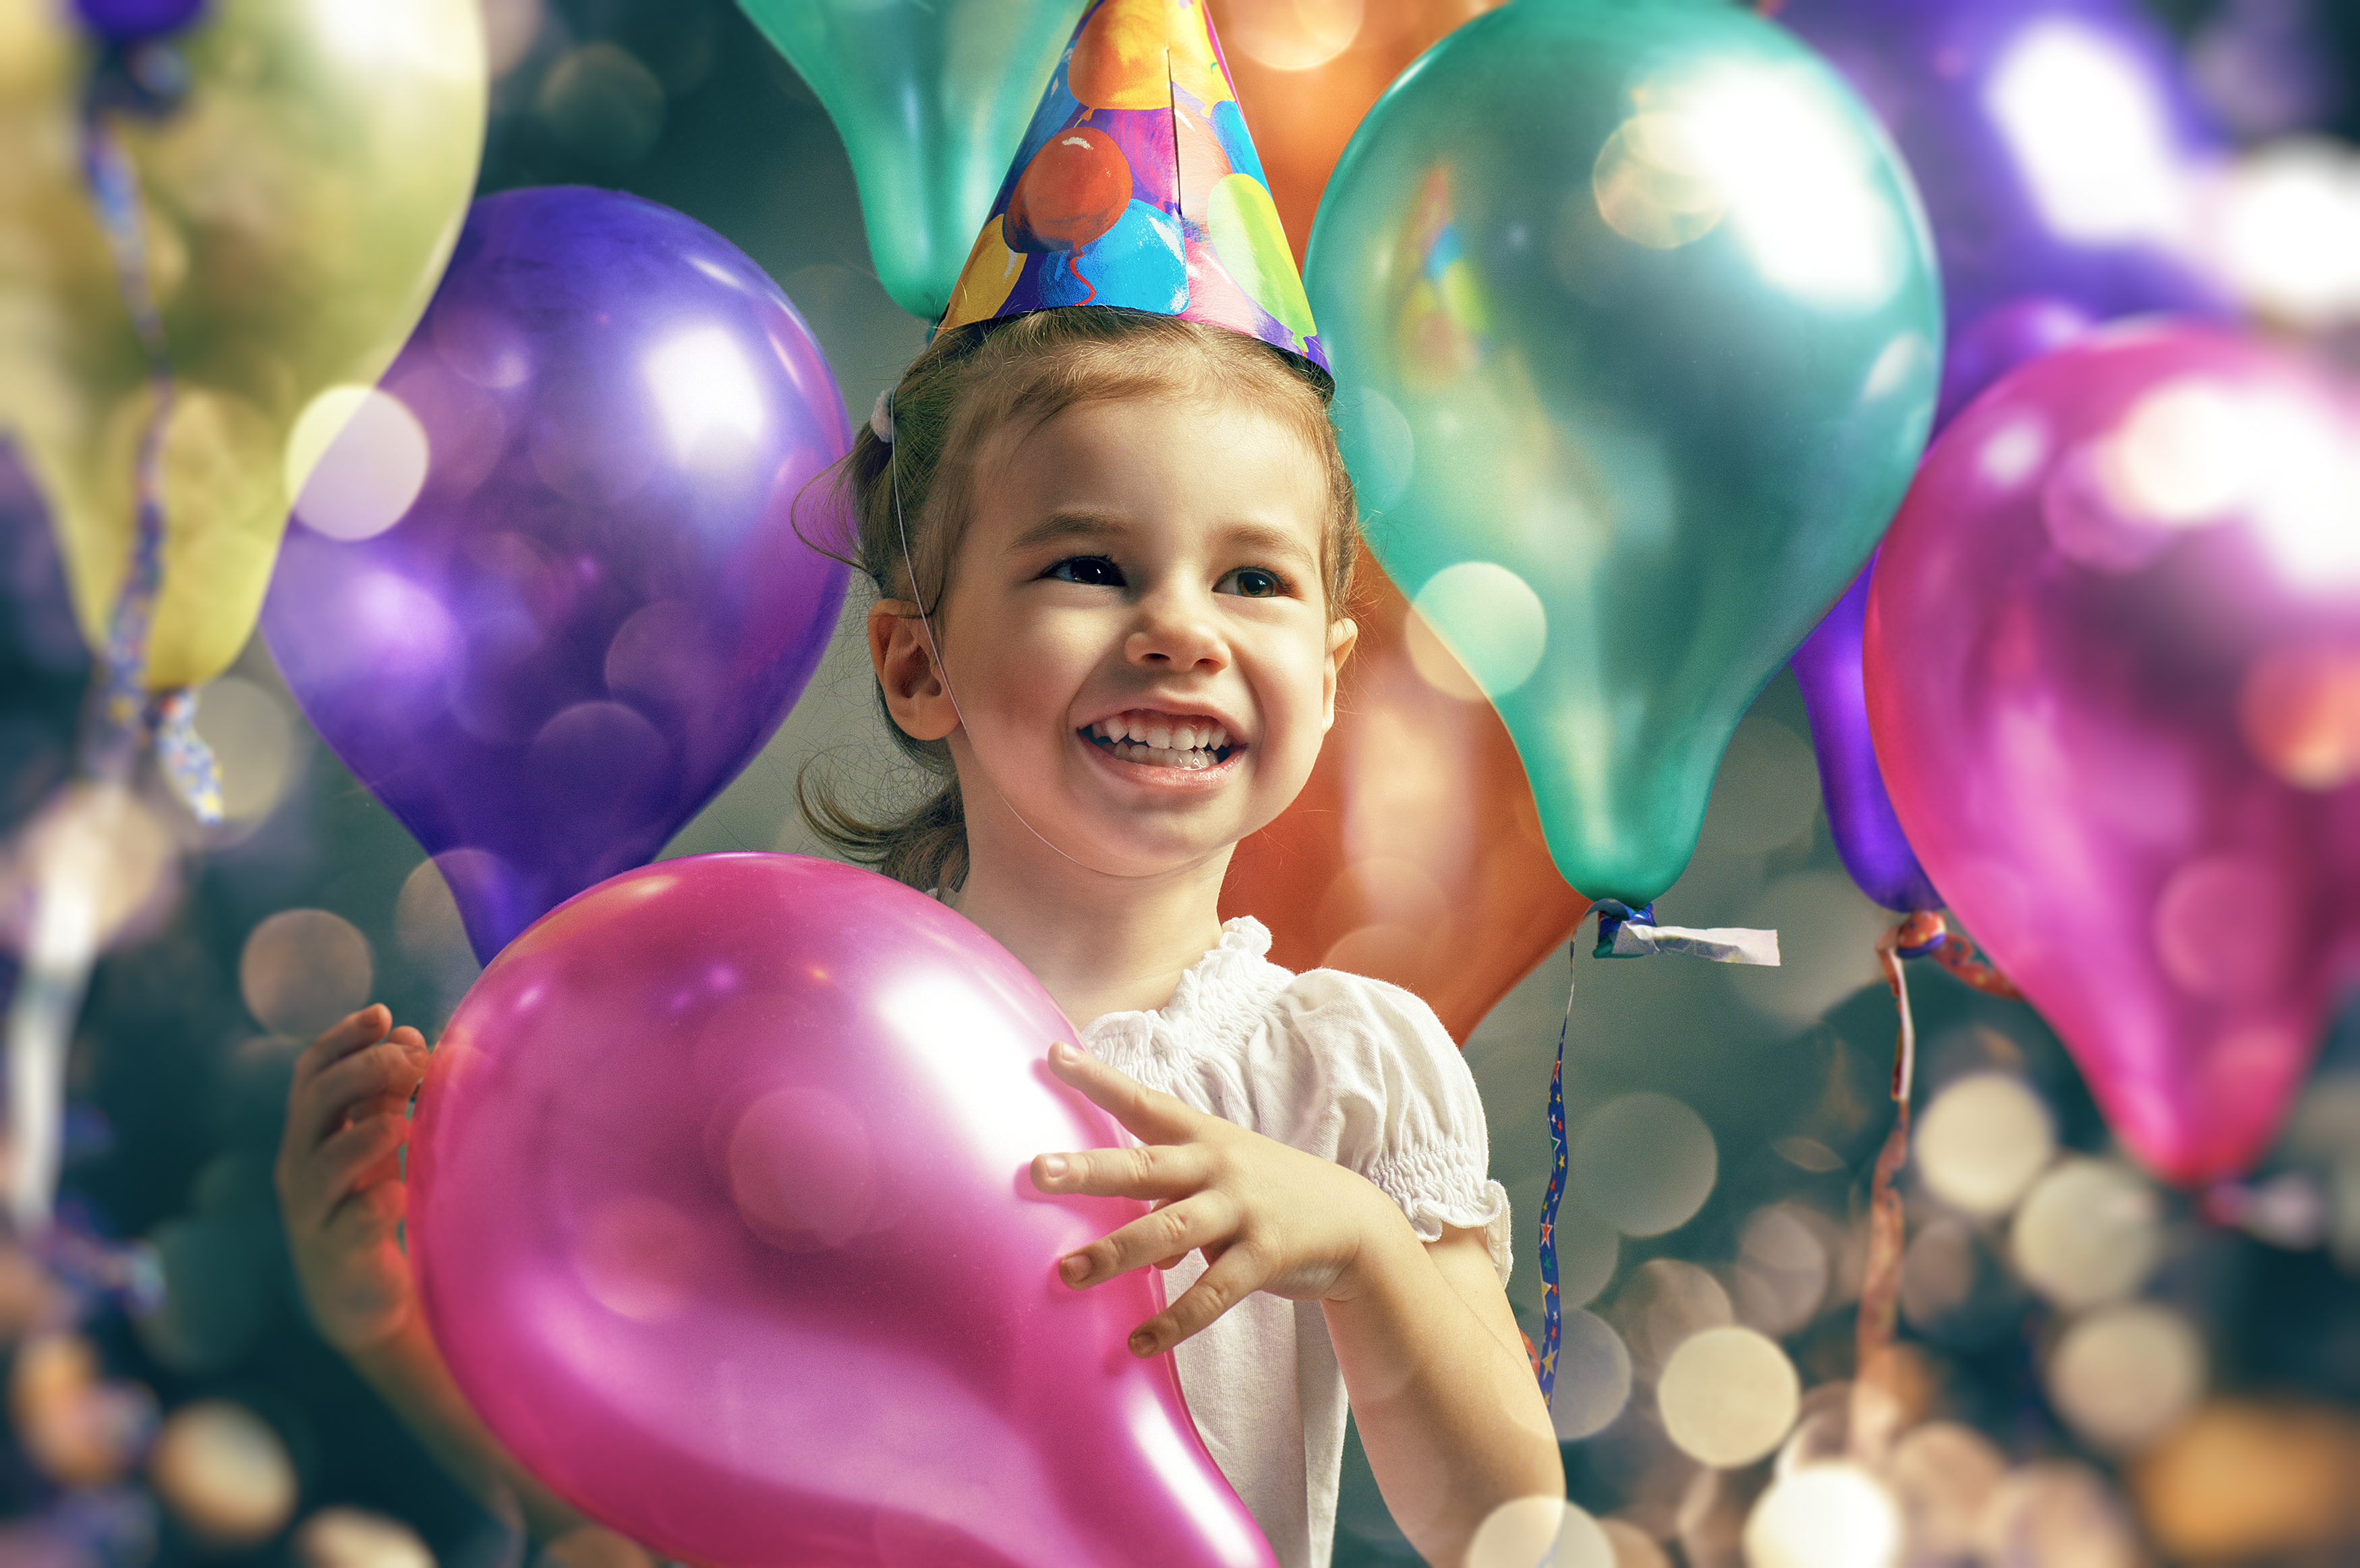 Young girl in party hat holding a pink balloon with multicolored balloons in the background